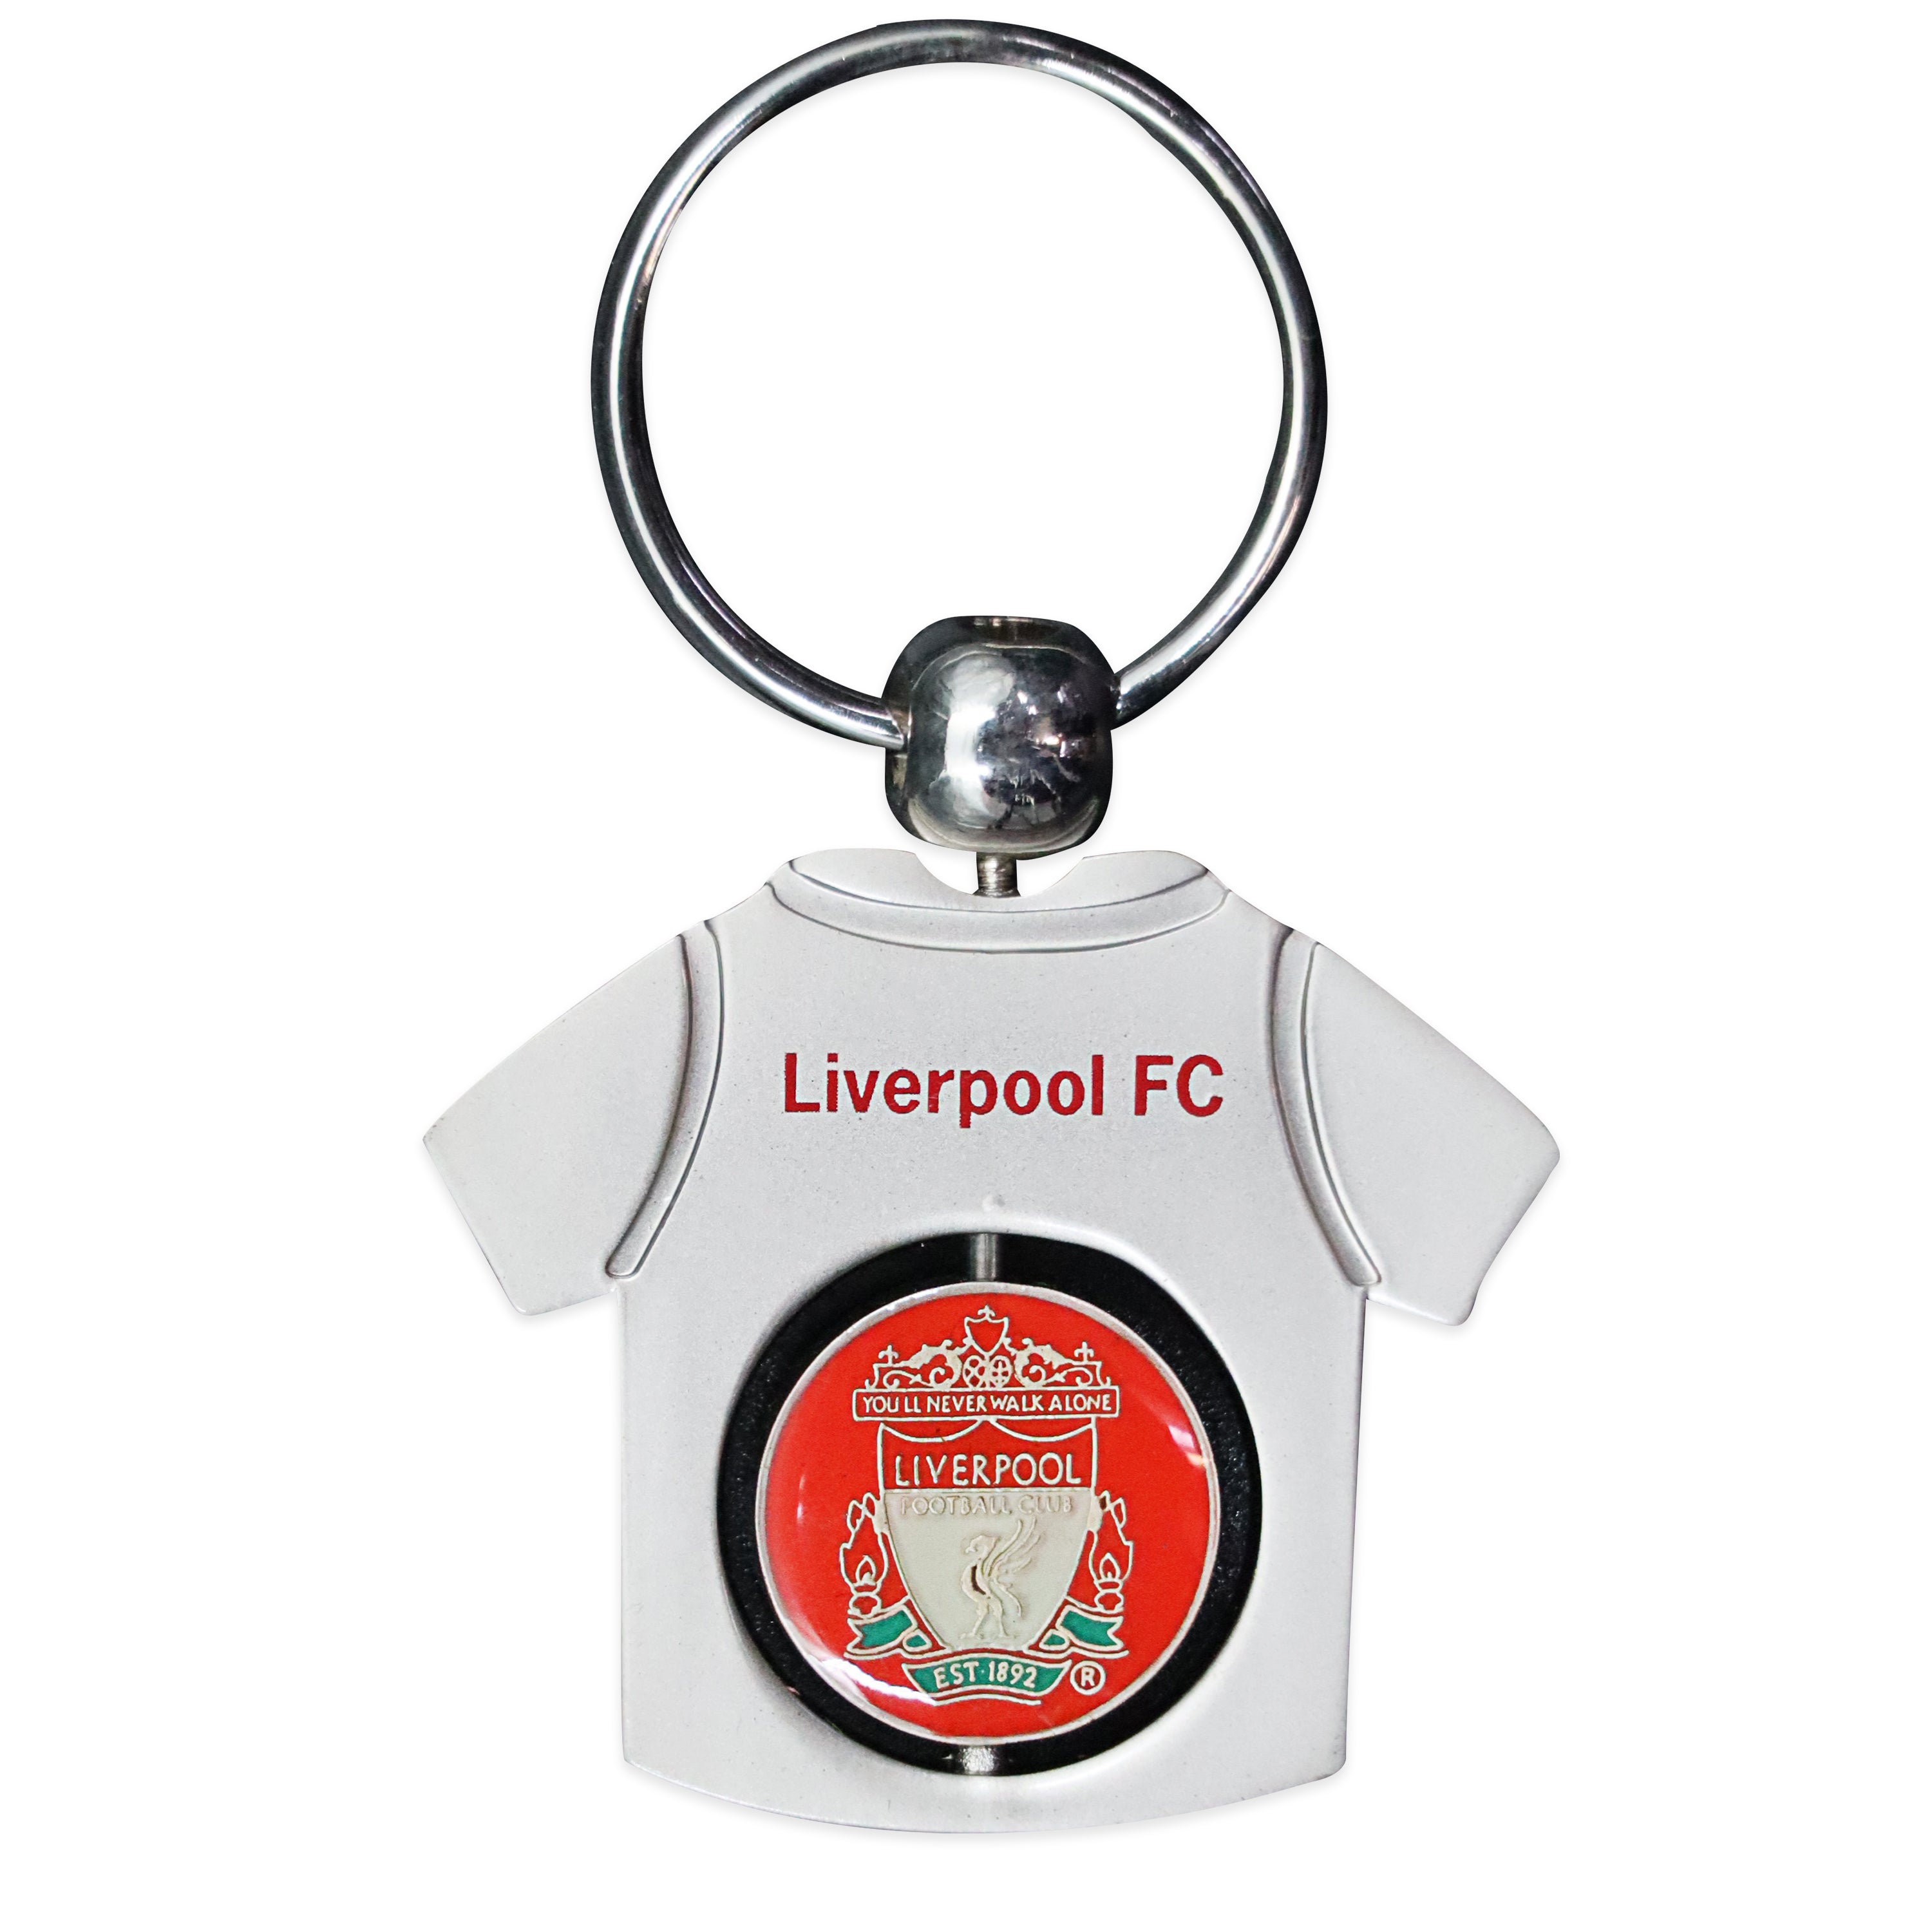 Liverpool F.C. Jersey Keyring sold by British Gift Shop